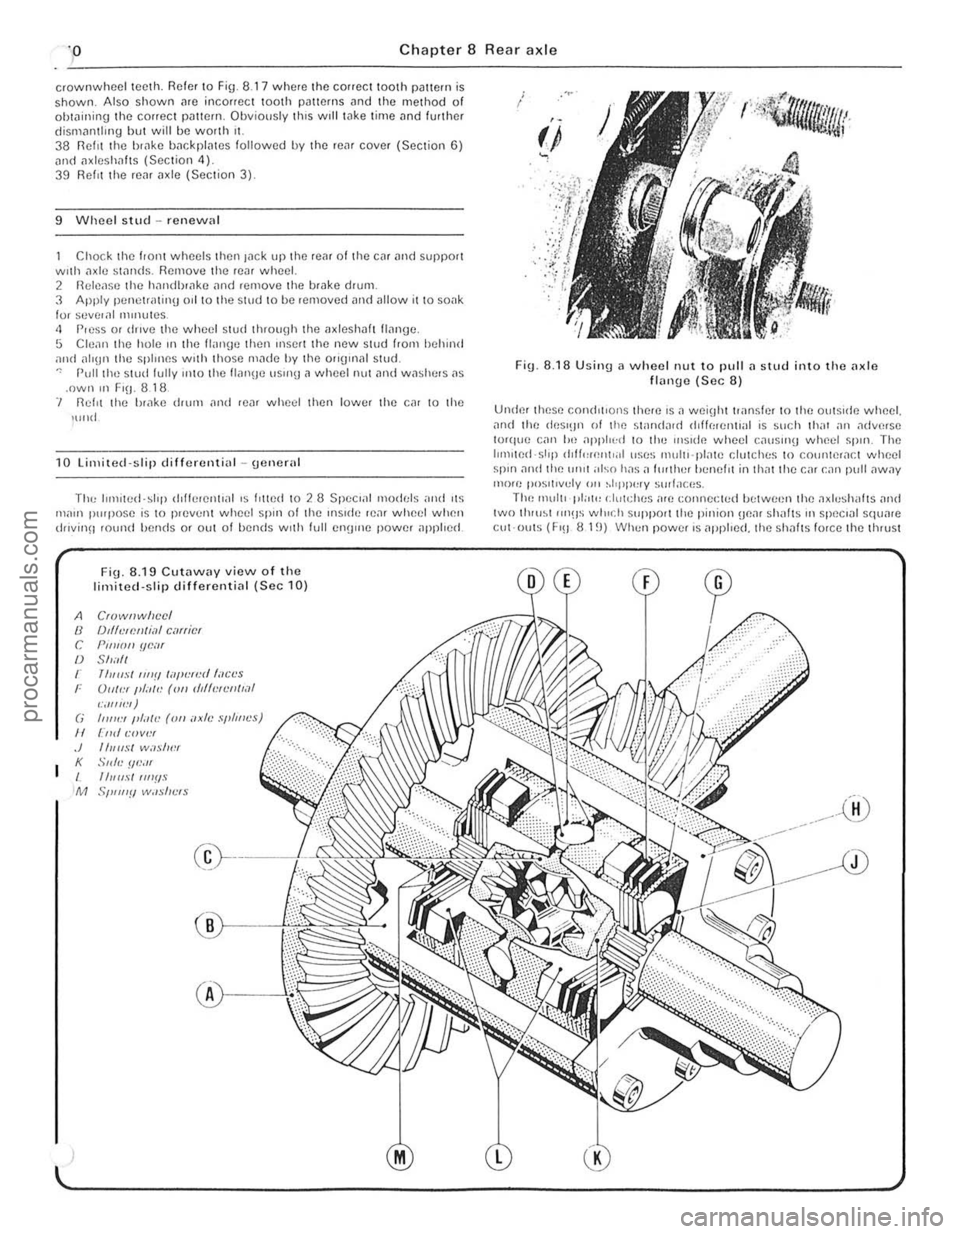 FORD CAPRI 1974  Workshop Manual ·0 ) Chapter 8 Rear axle 
crowllwh(lcl teeth. Refer  to Fig 8. 7 where the corrcCl100l h paltcrn is shown, Also shown arc incorrec t loorh  patterns  ilnd the method  of oi11<lining the conect patte